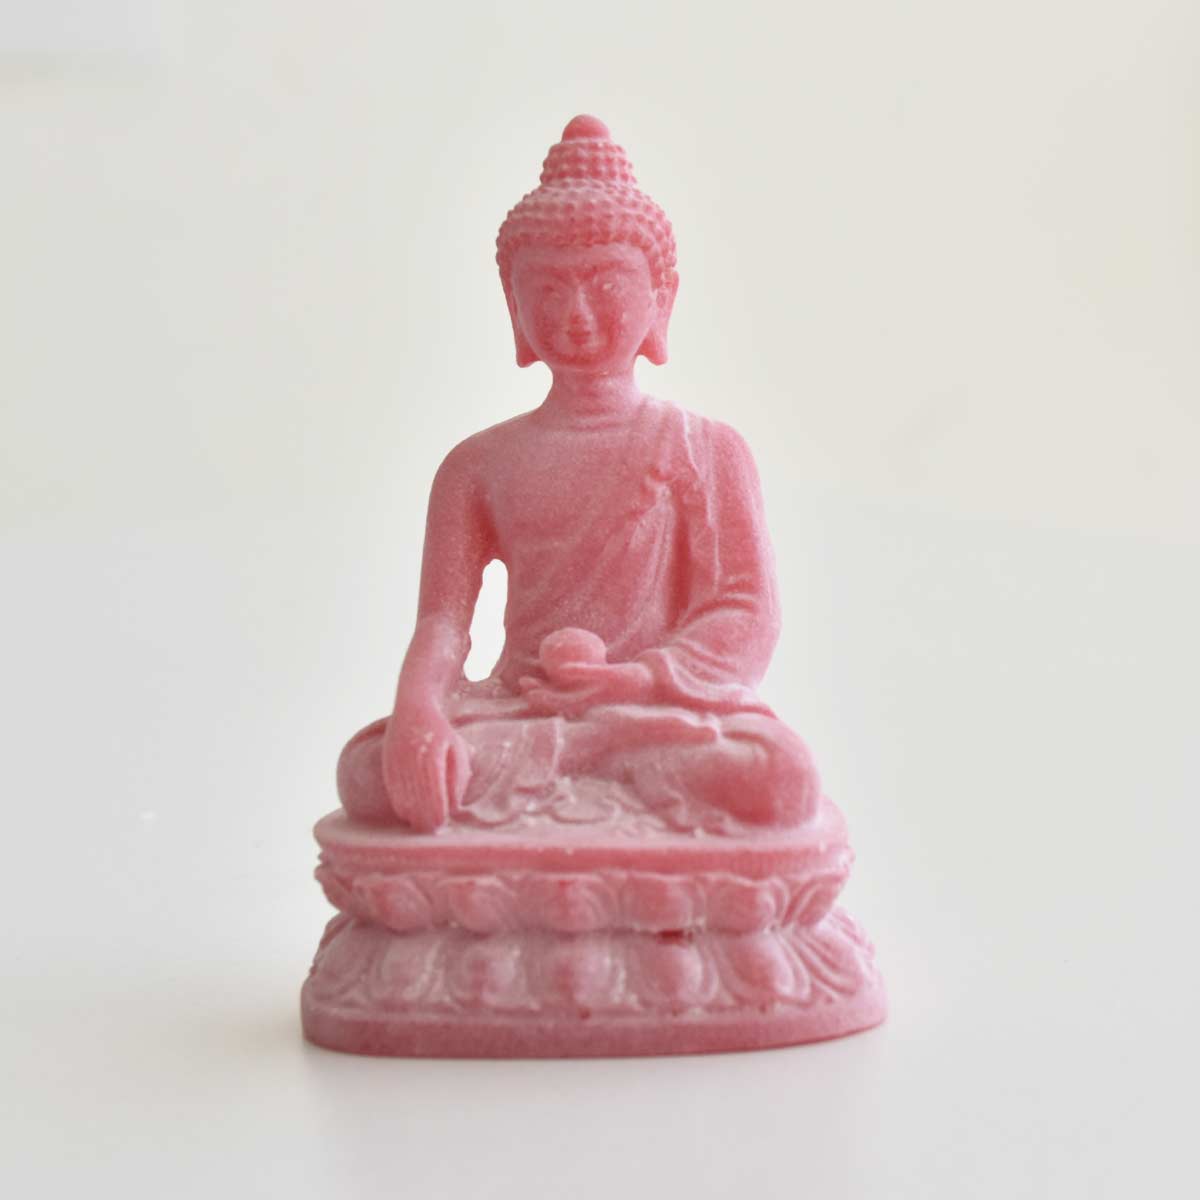 6 Piece Hamper for Mothers Day with Buddha Figure, Cashew Nuts and Greeting Card-4